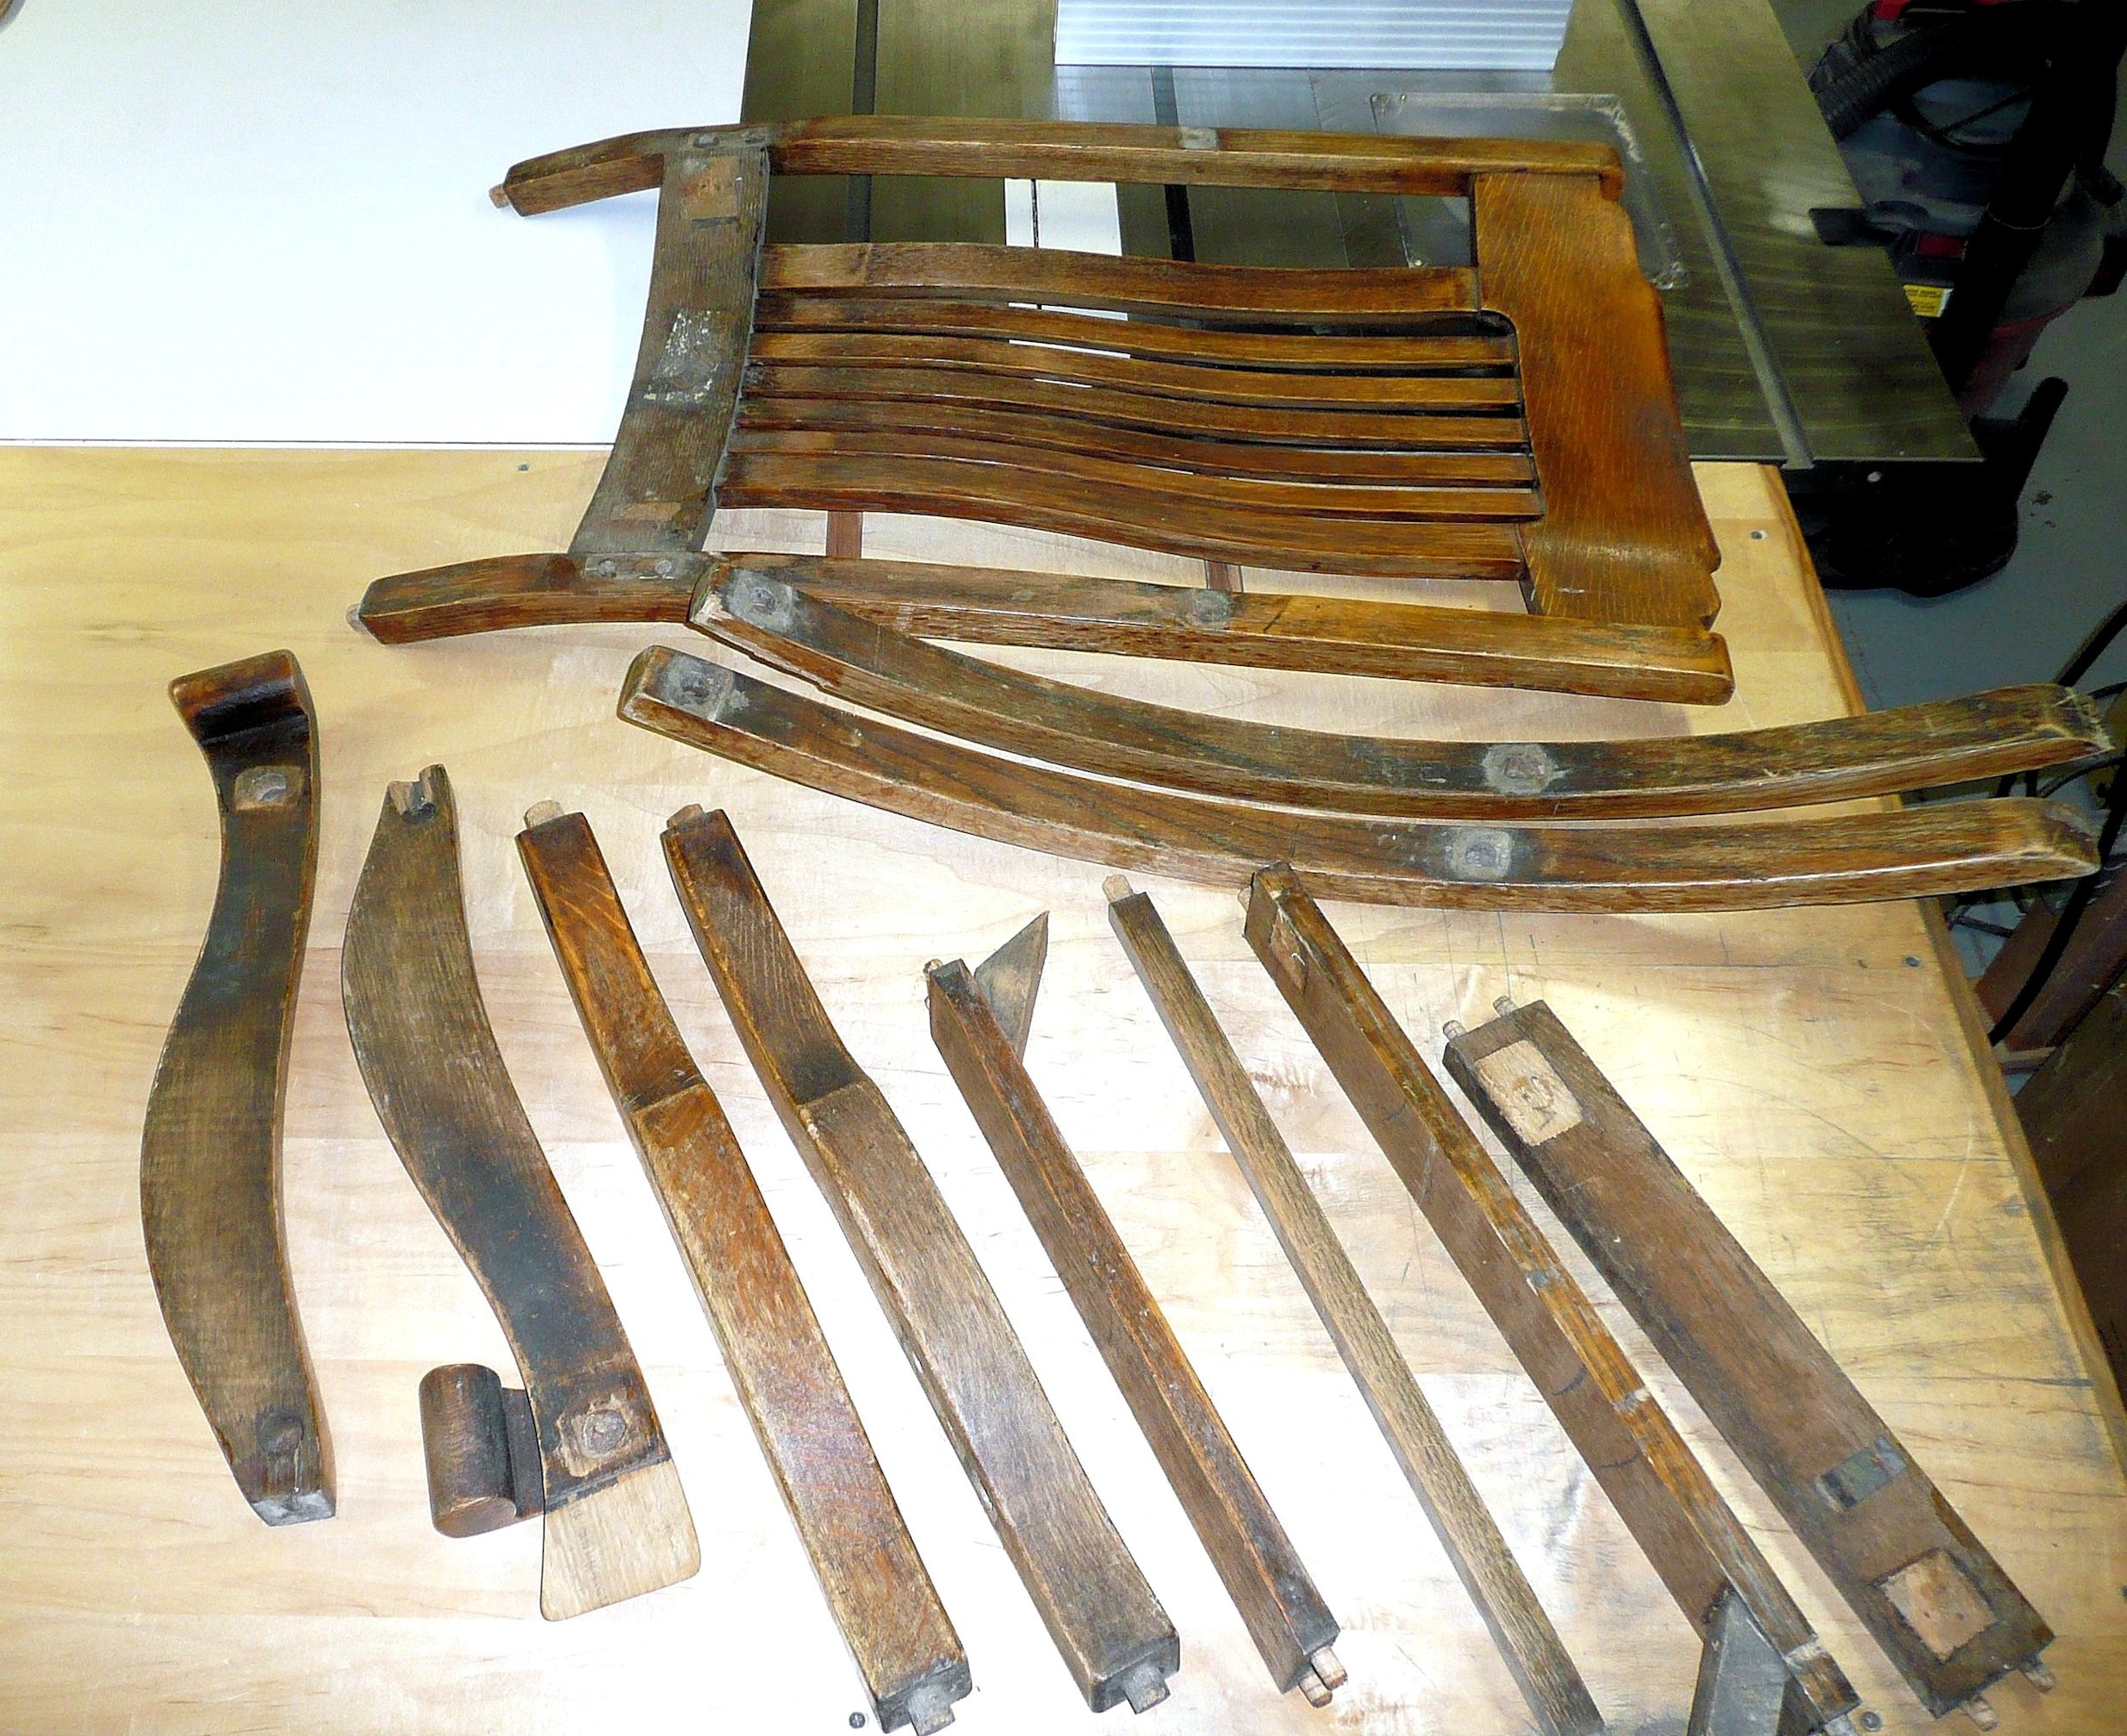 Wood Rocking Chair Repair Parts  . A Rocking Chair Goes Through A Significant Amount Of Wear And Tear Over Its Life.